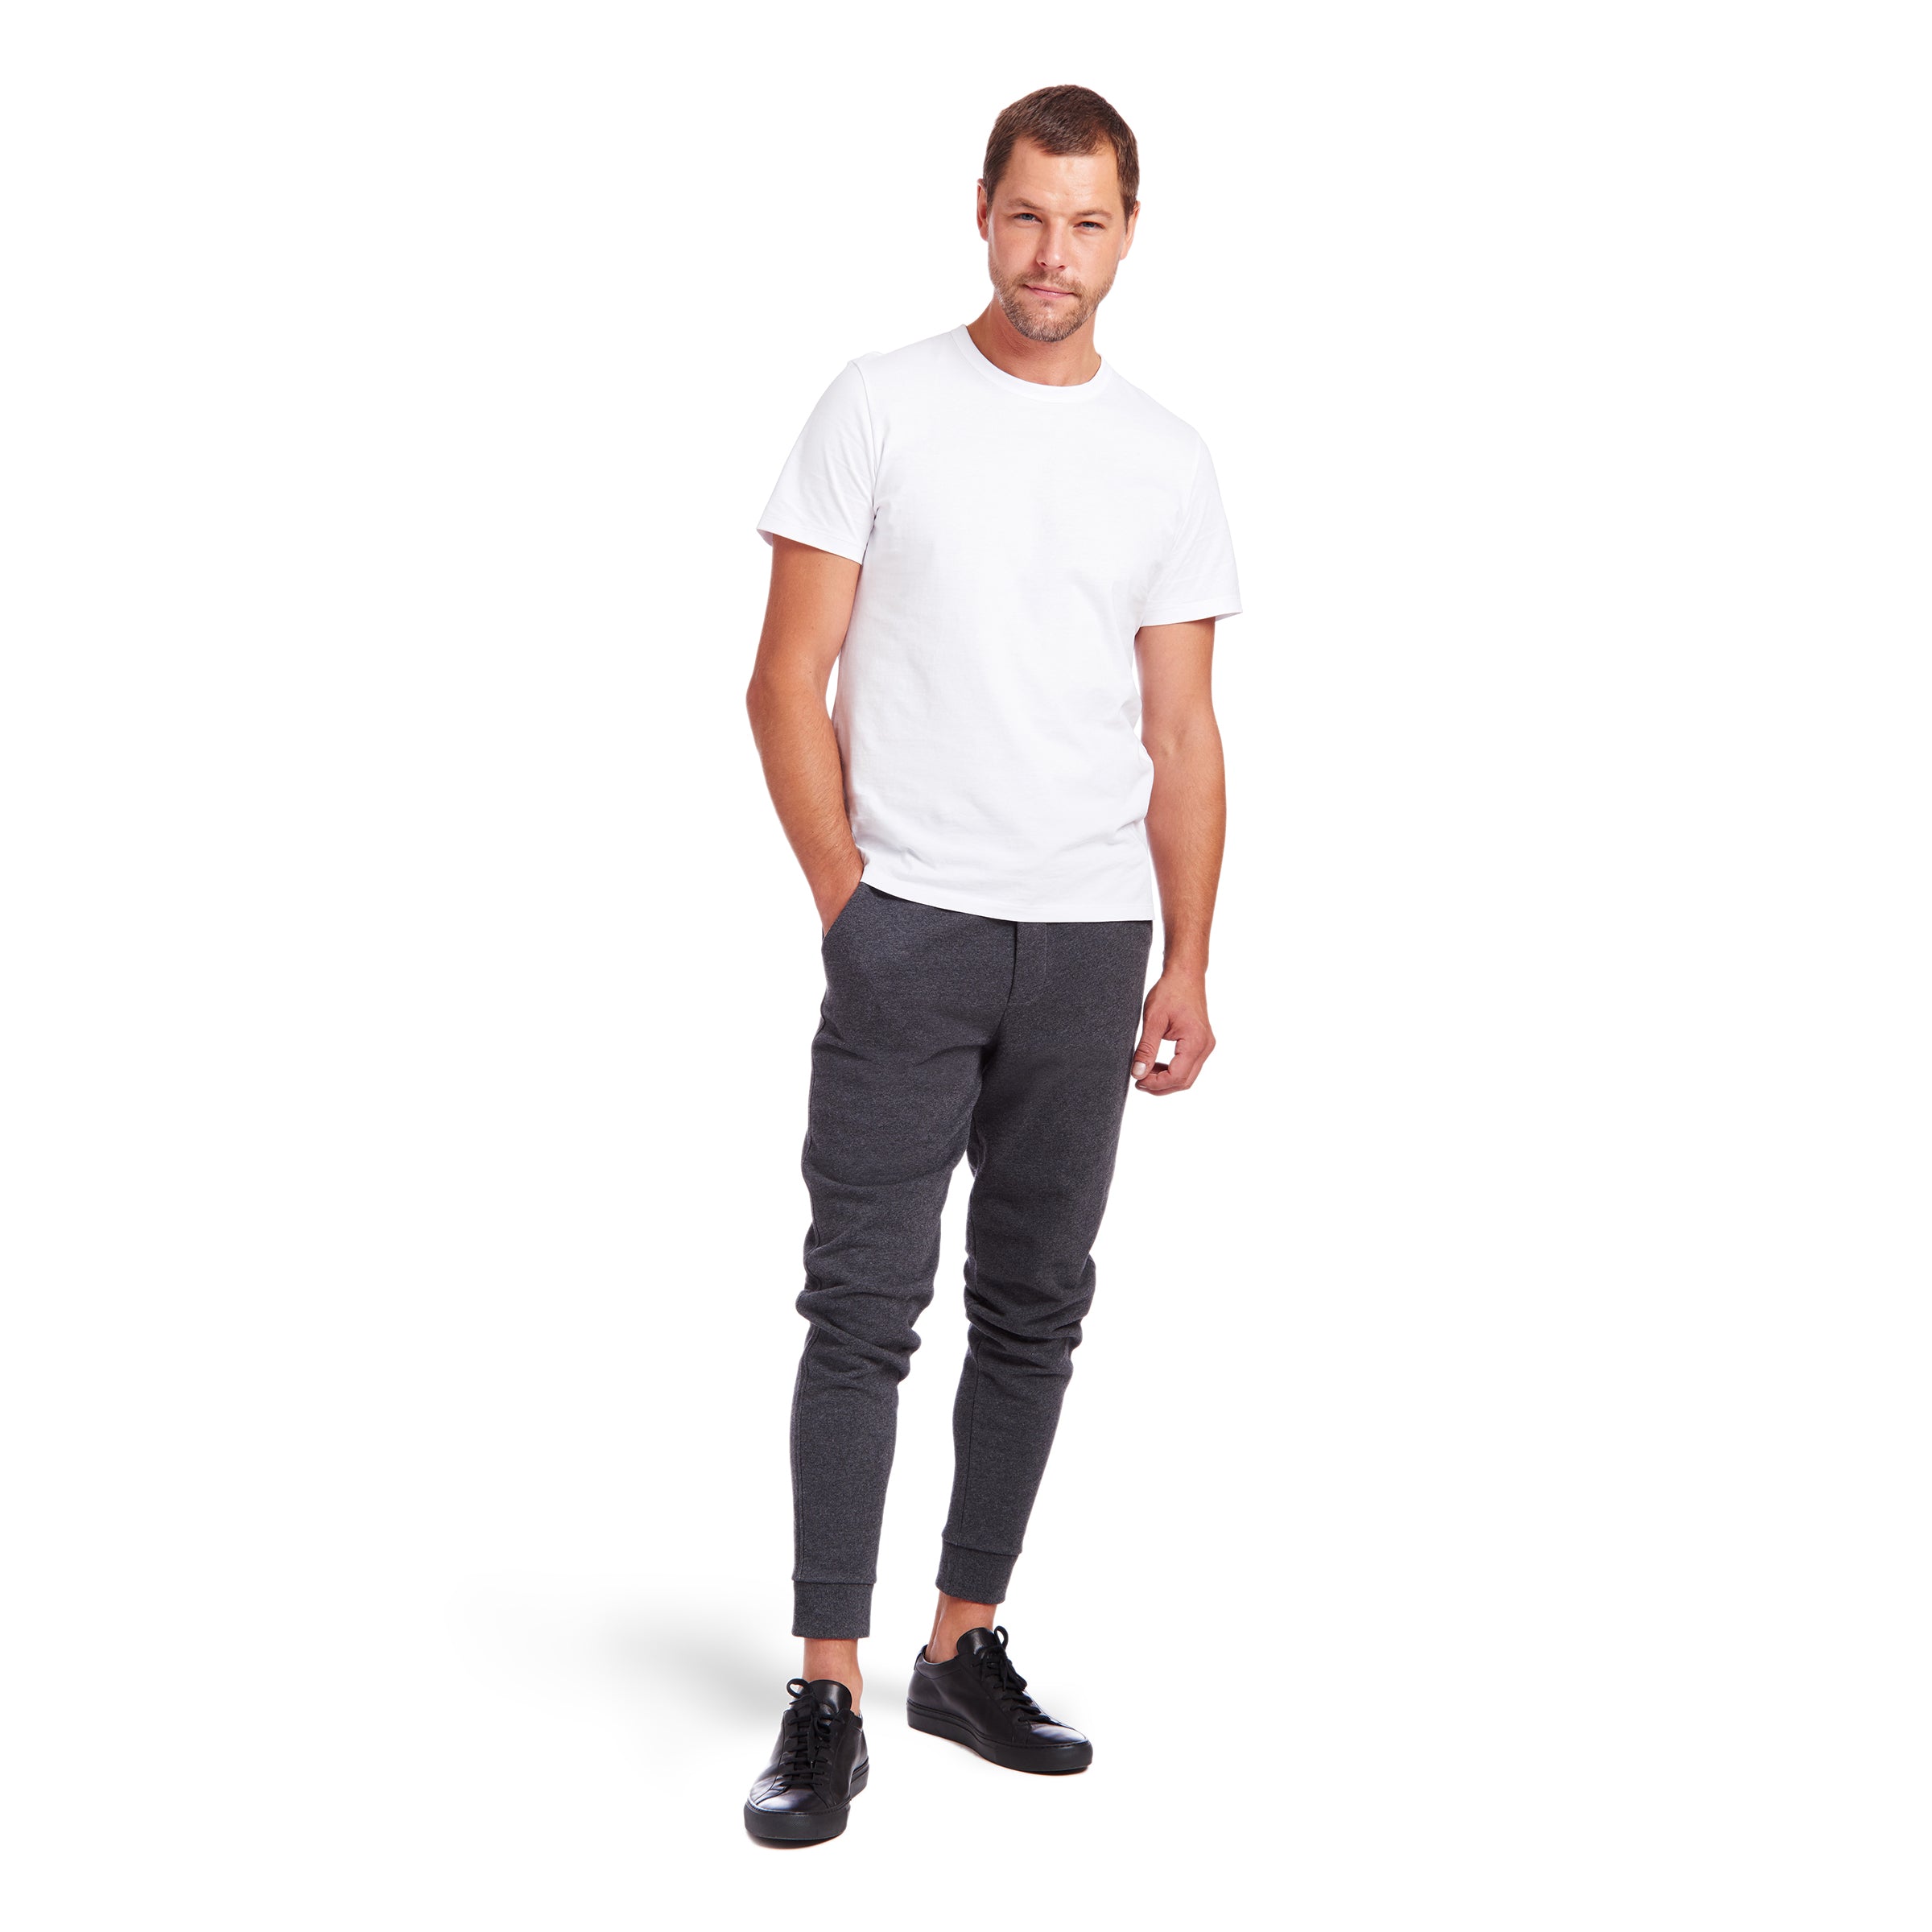 Men wearing Charcoal Heather The French Terry Sweatpant Hooper